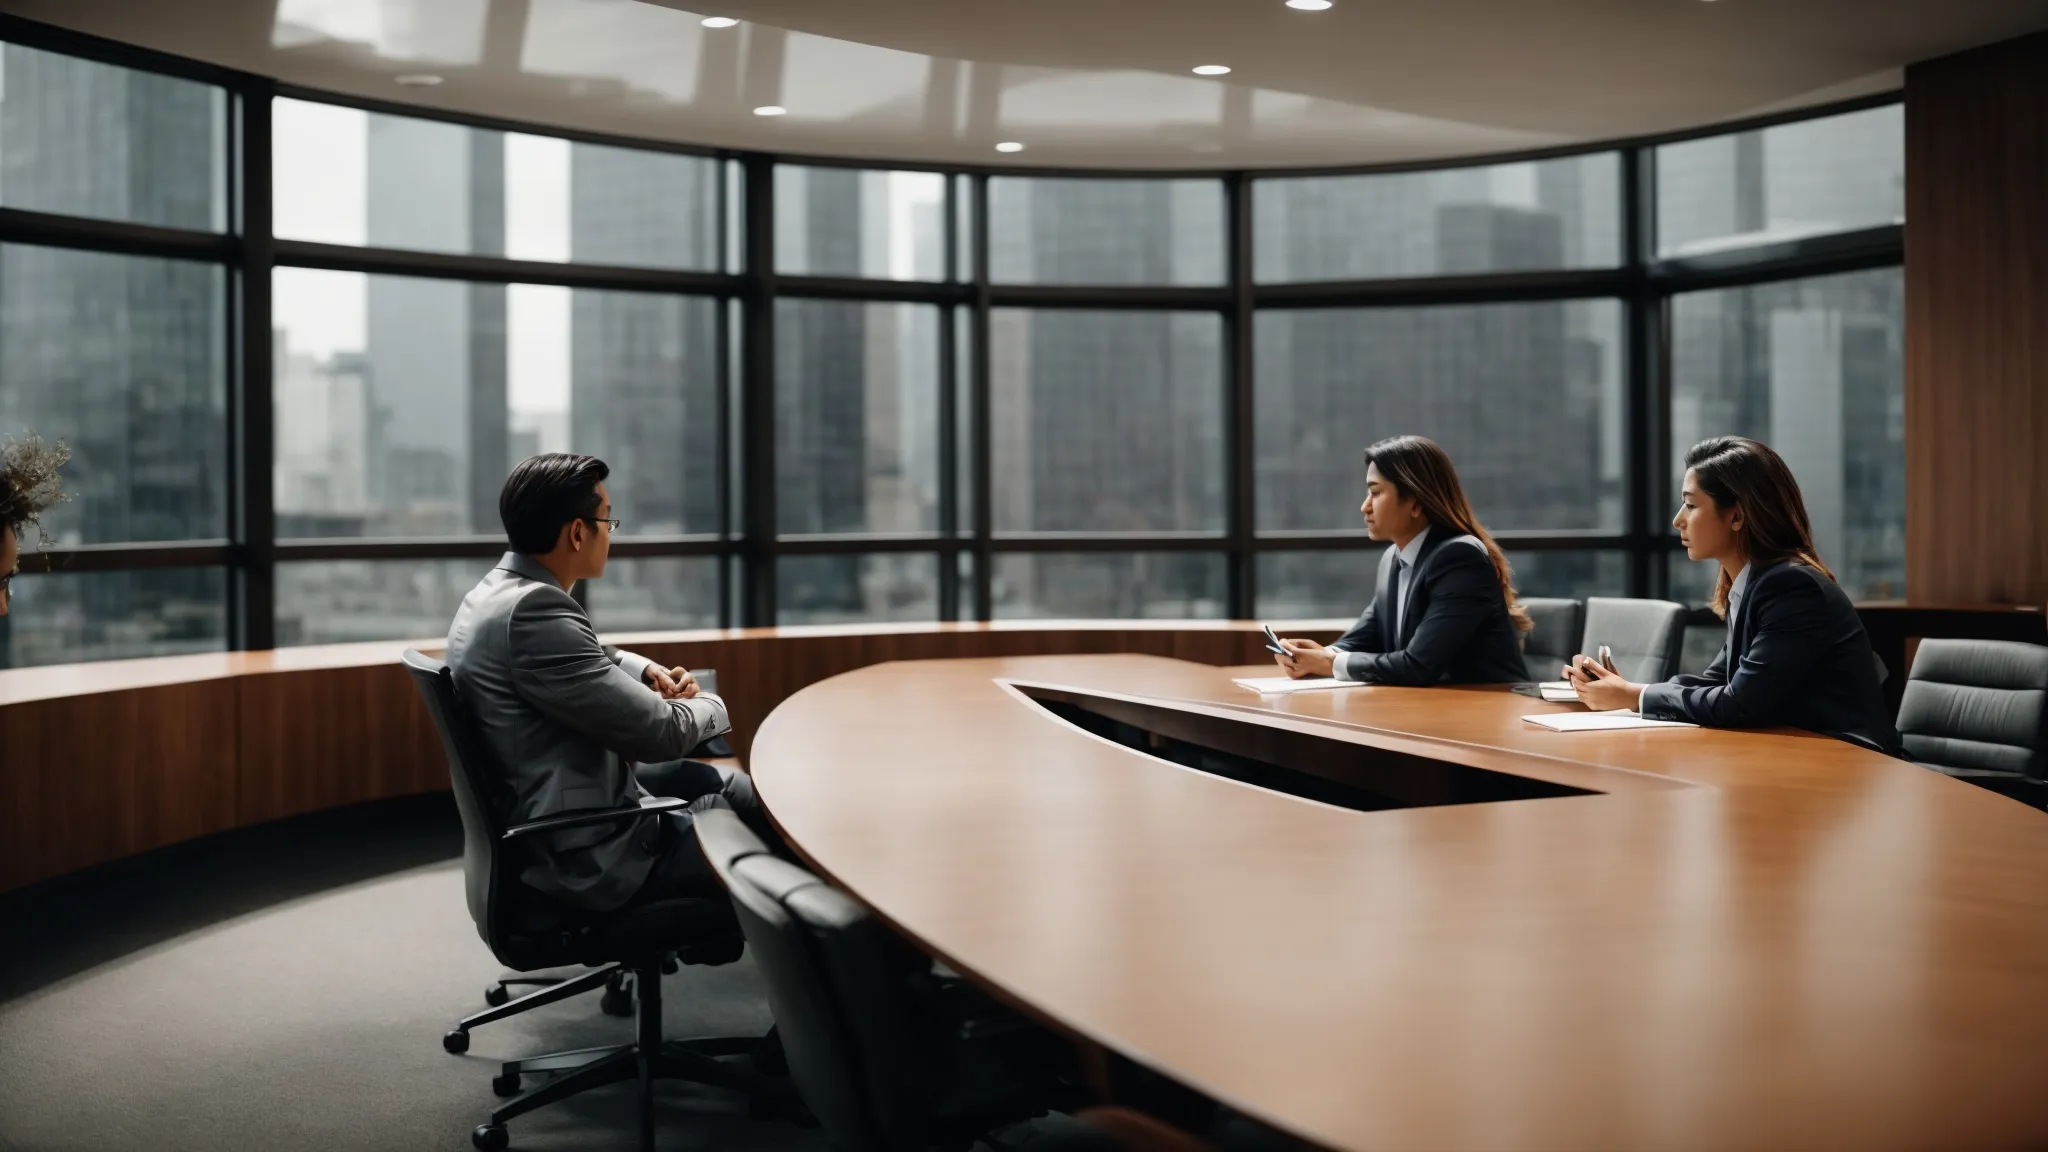 a client and a consultant sit face-to-face at a modern conference table, actively engaging in a focused discussion over a shared document that outlines a strategic plan.